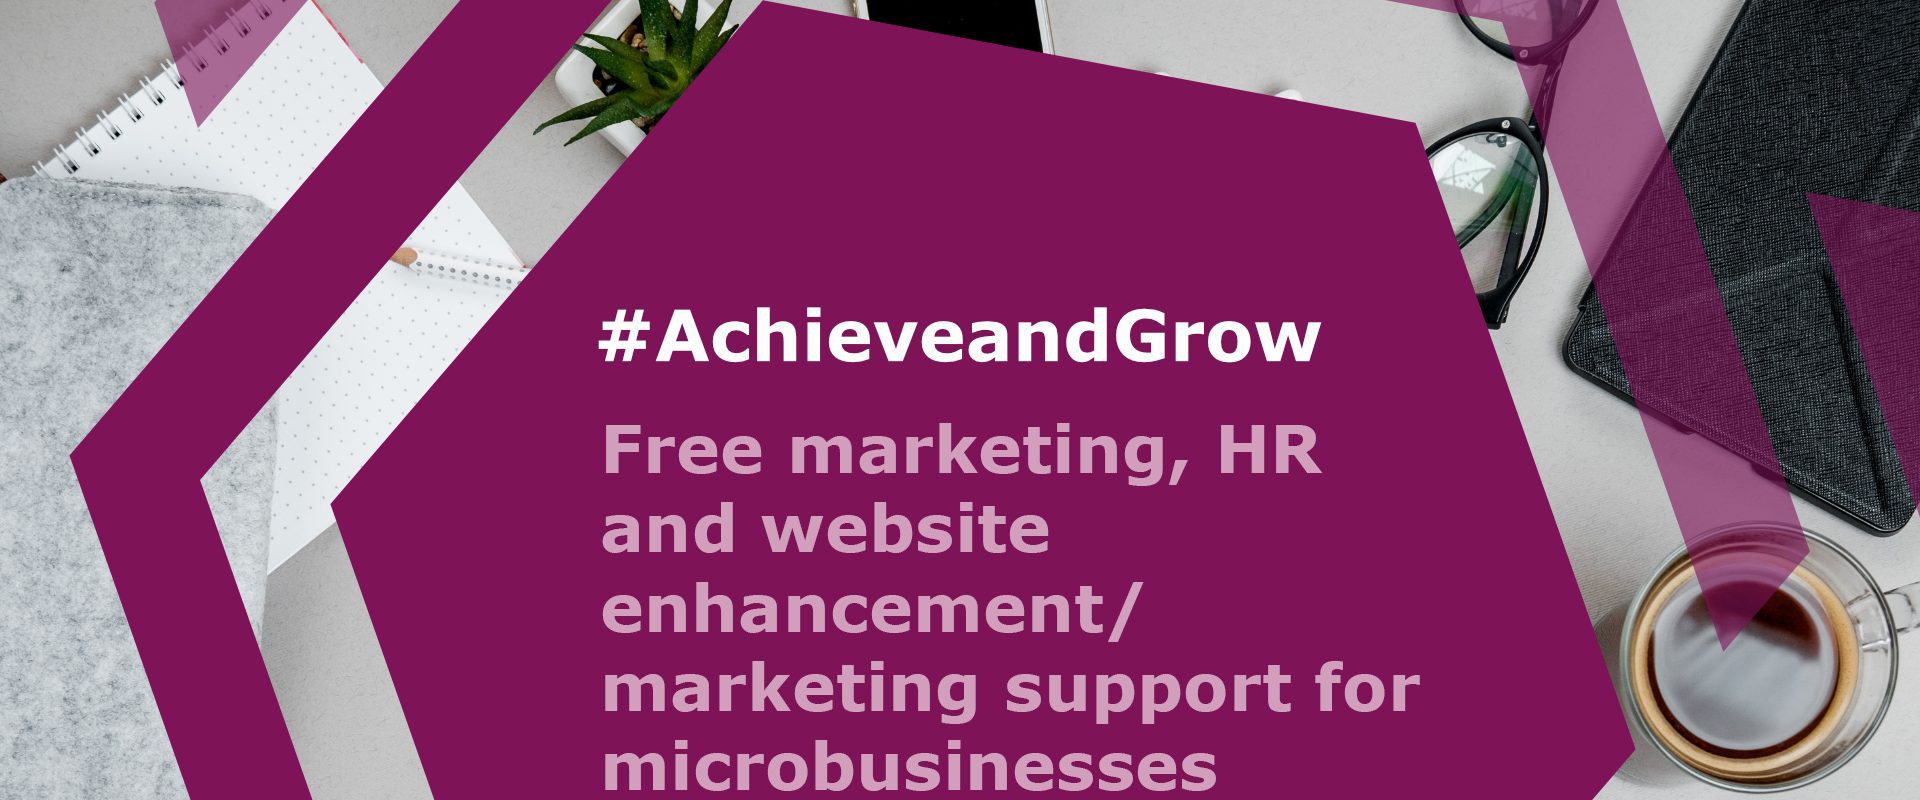 Free marketing, HR and website enhancement/marketing support for microbusinesses